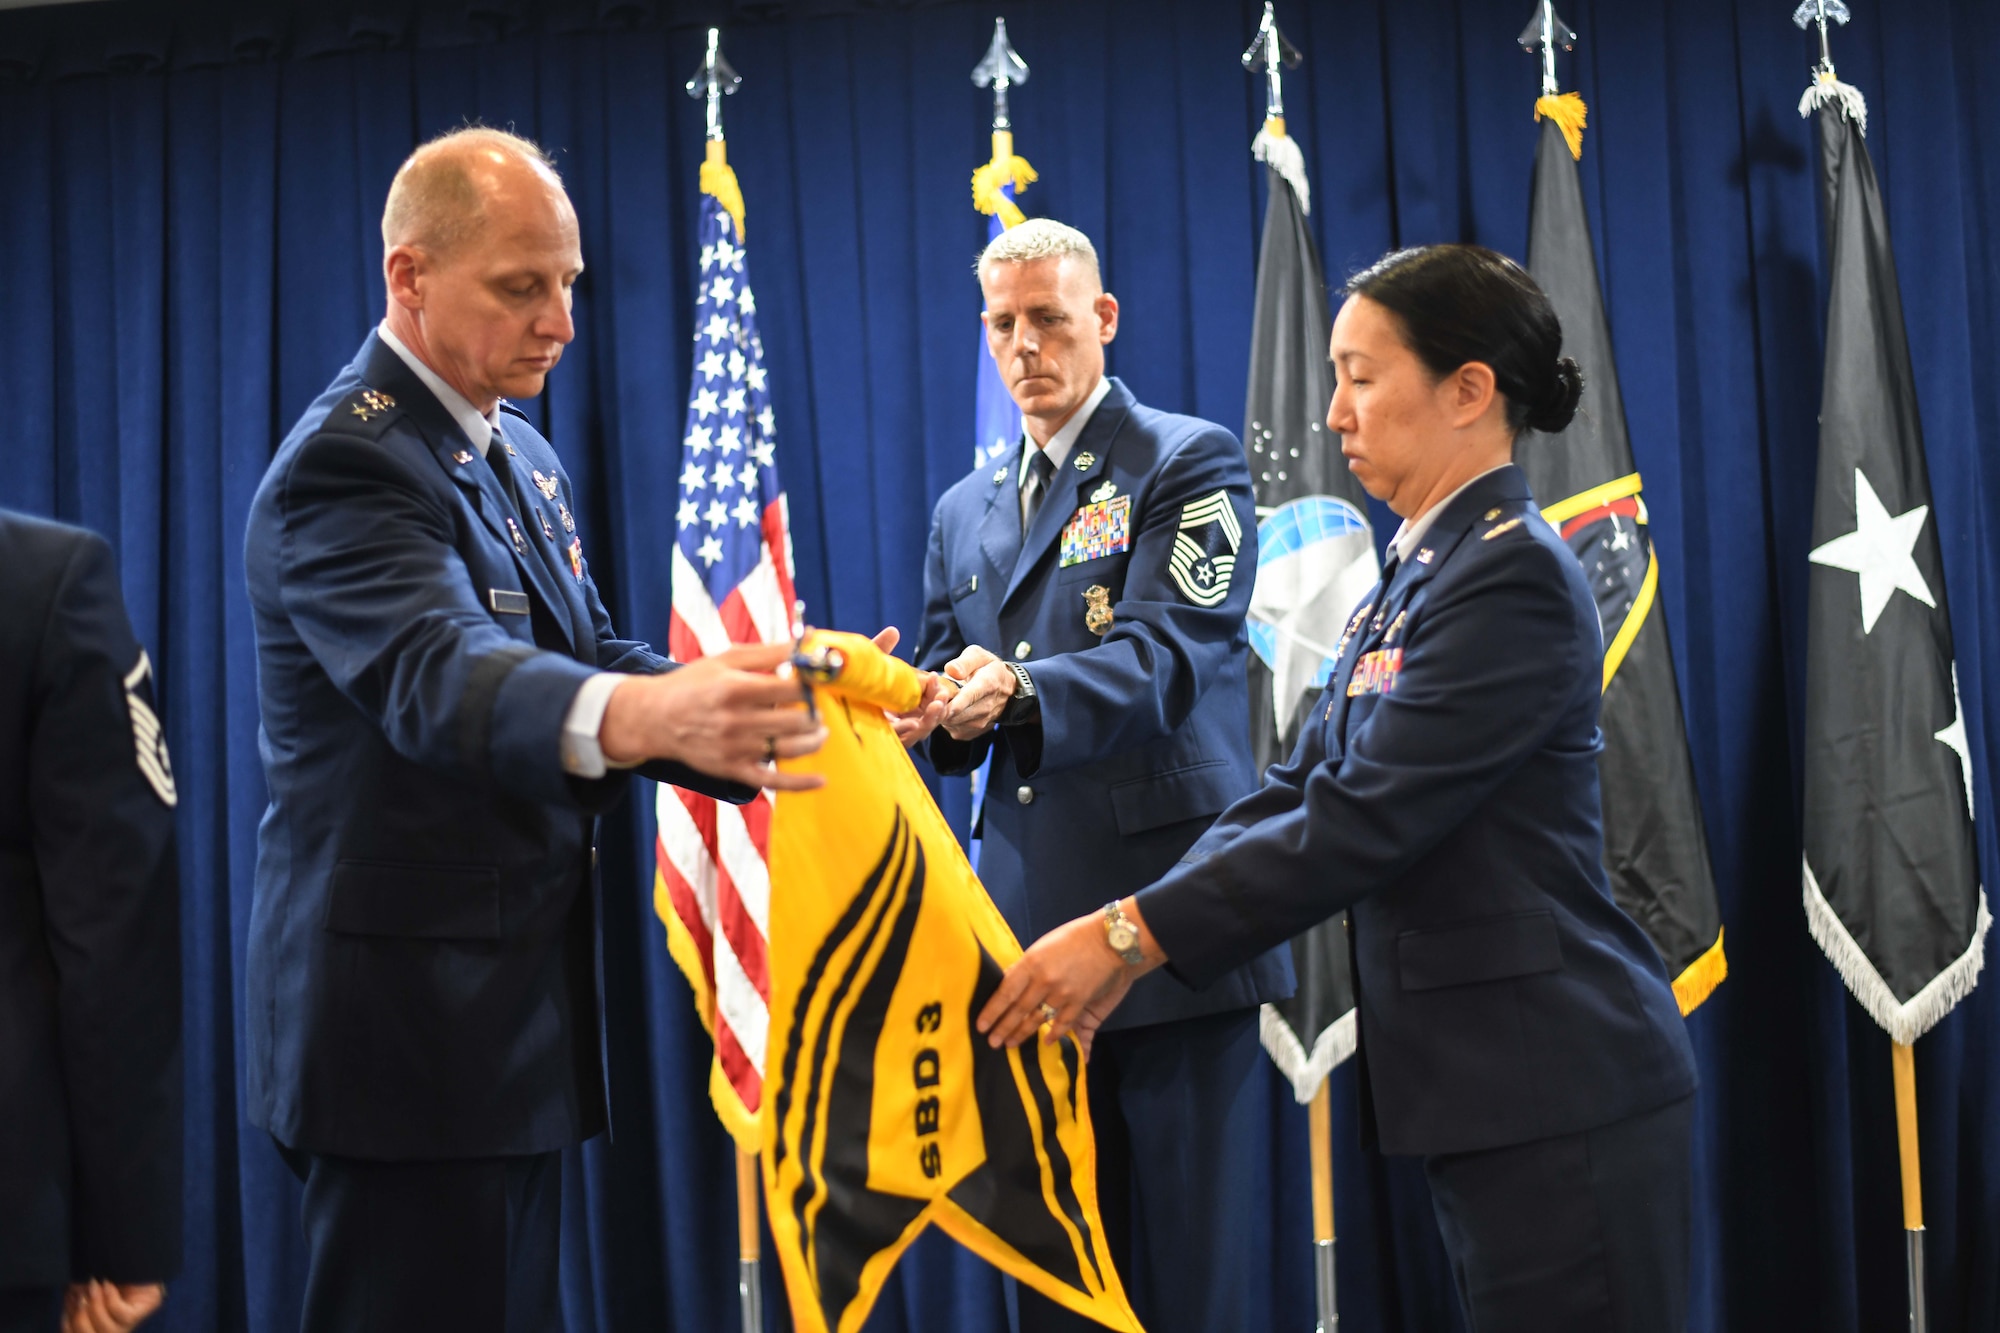 Col. Mia Walsh, commander, Space Base Delta 3, right, unfurls the SBD 3 guidon with Lt. Gen. Michael Guetlein, commander, Space Systems Command, left, on July 14 at Los Angeles Air Force Base.  Chief Master Sgt. Michael Groder, acting Senior Enlisted Leader for SBD 3, assists with the guidon.